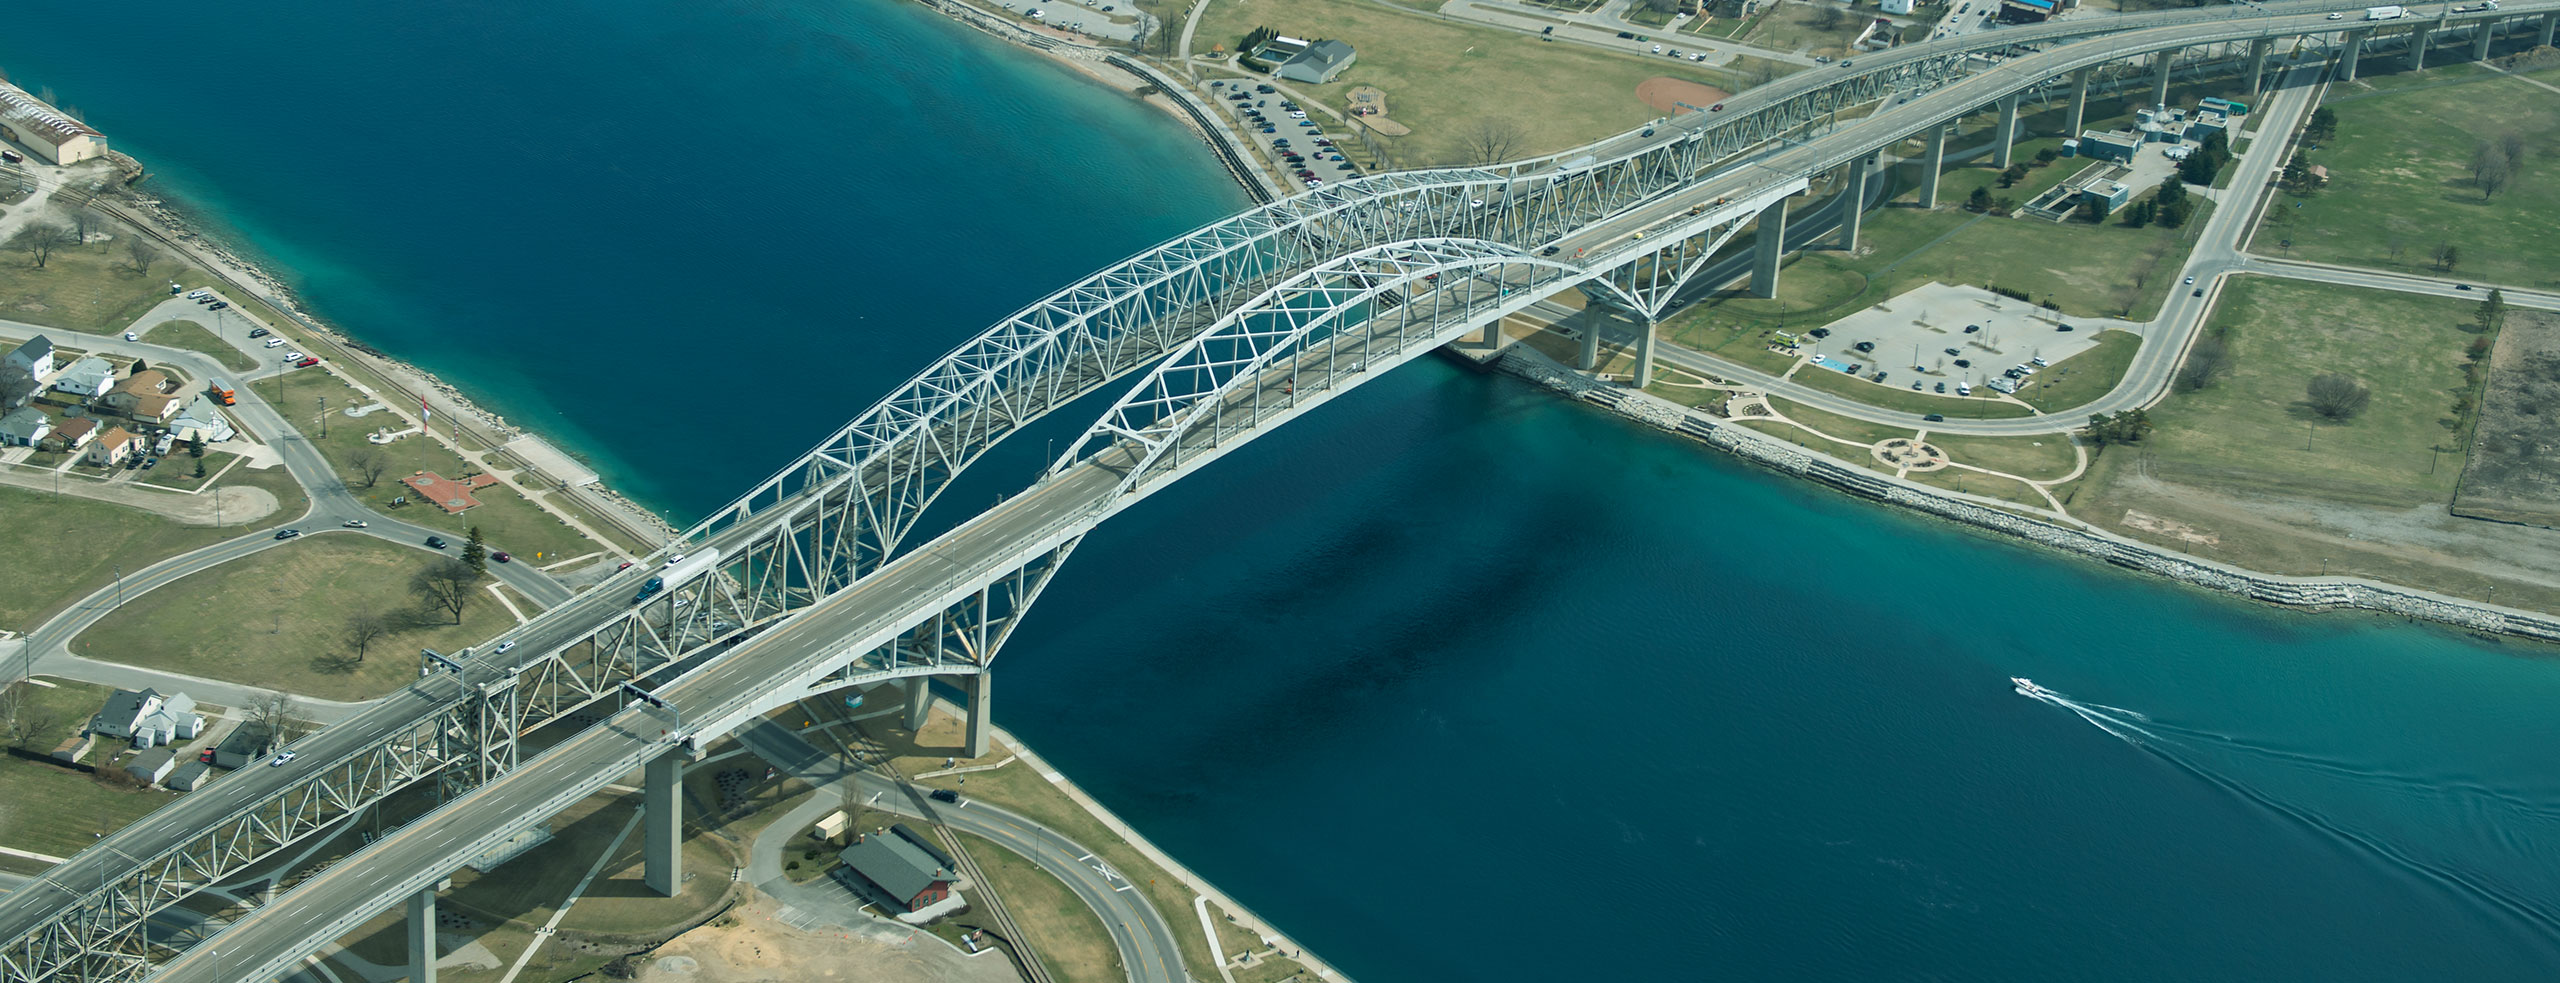 The bridge crossing at Sarnia, Ontario, Canada on a sunny day from birds eye view